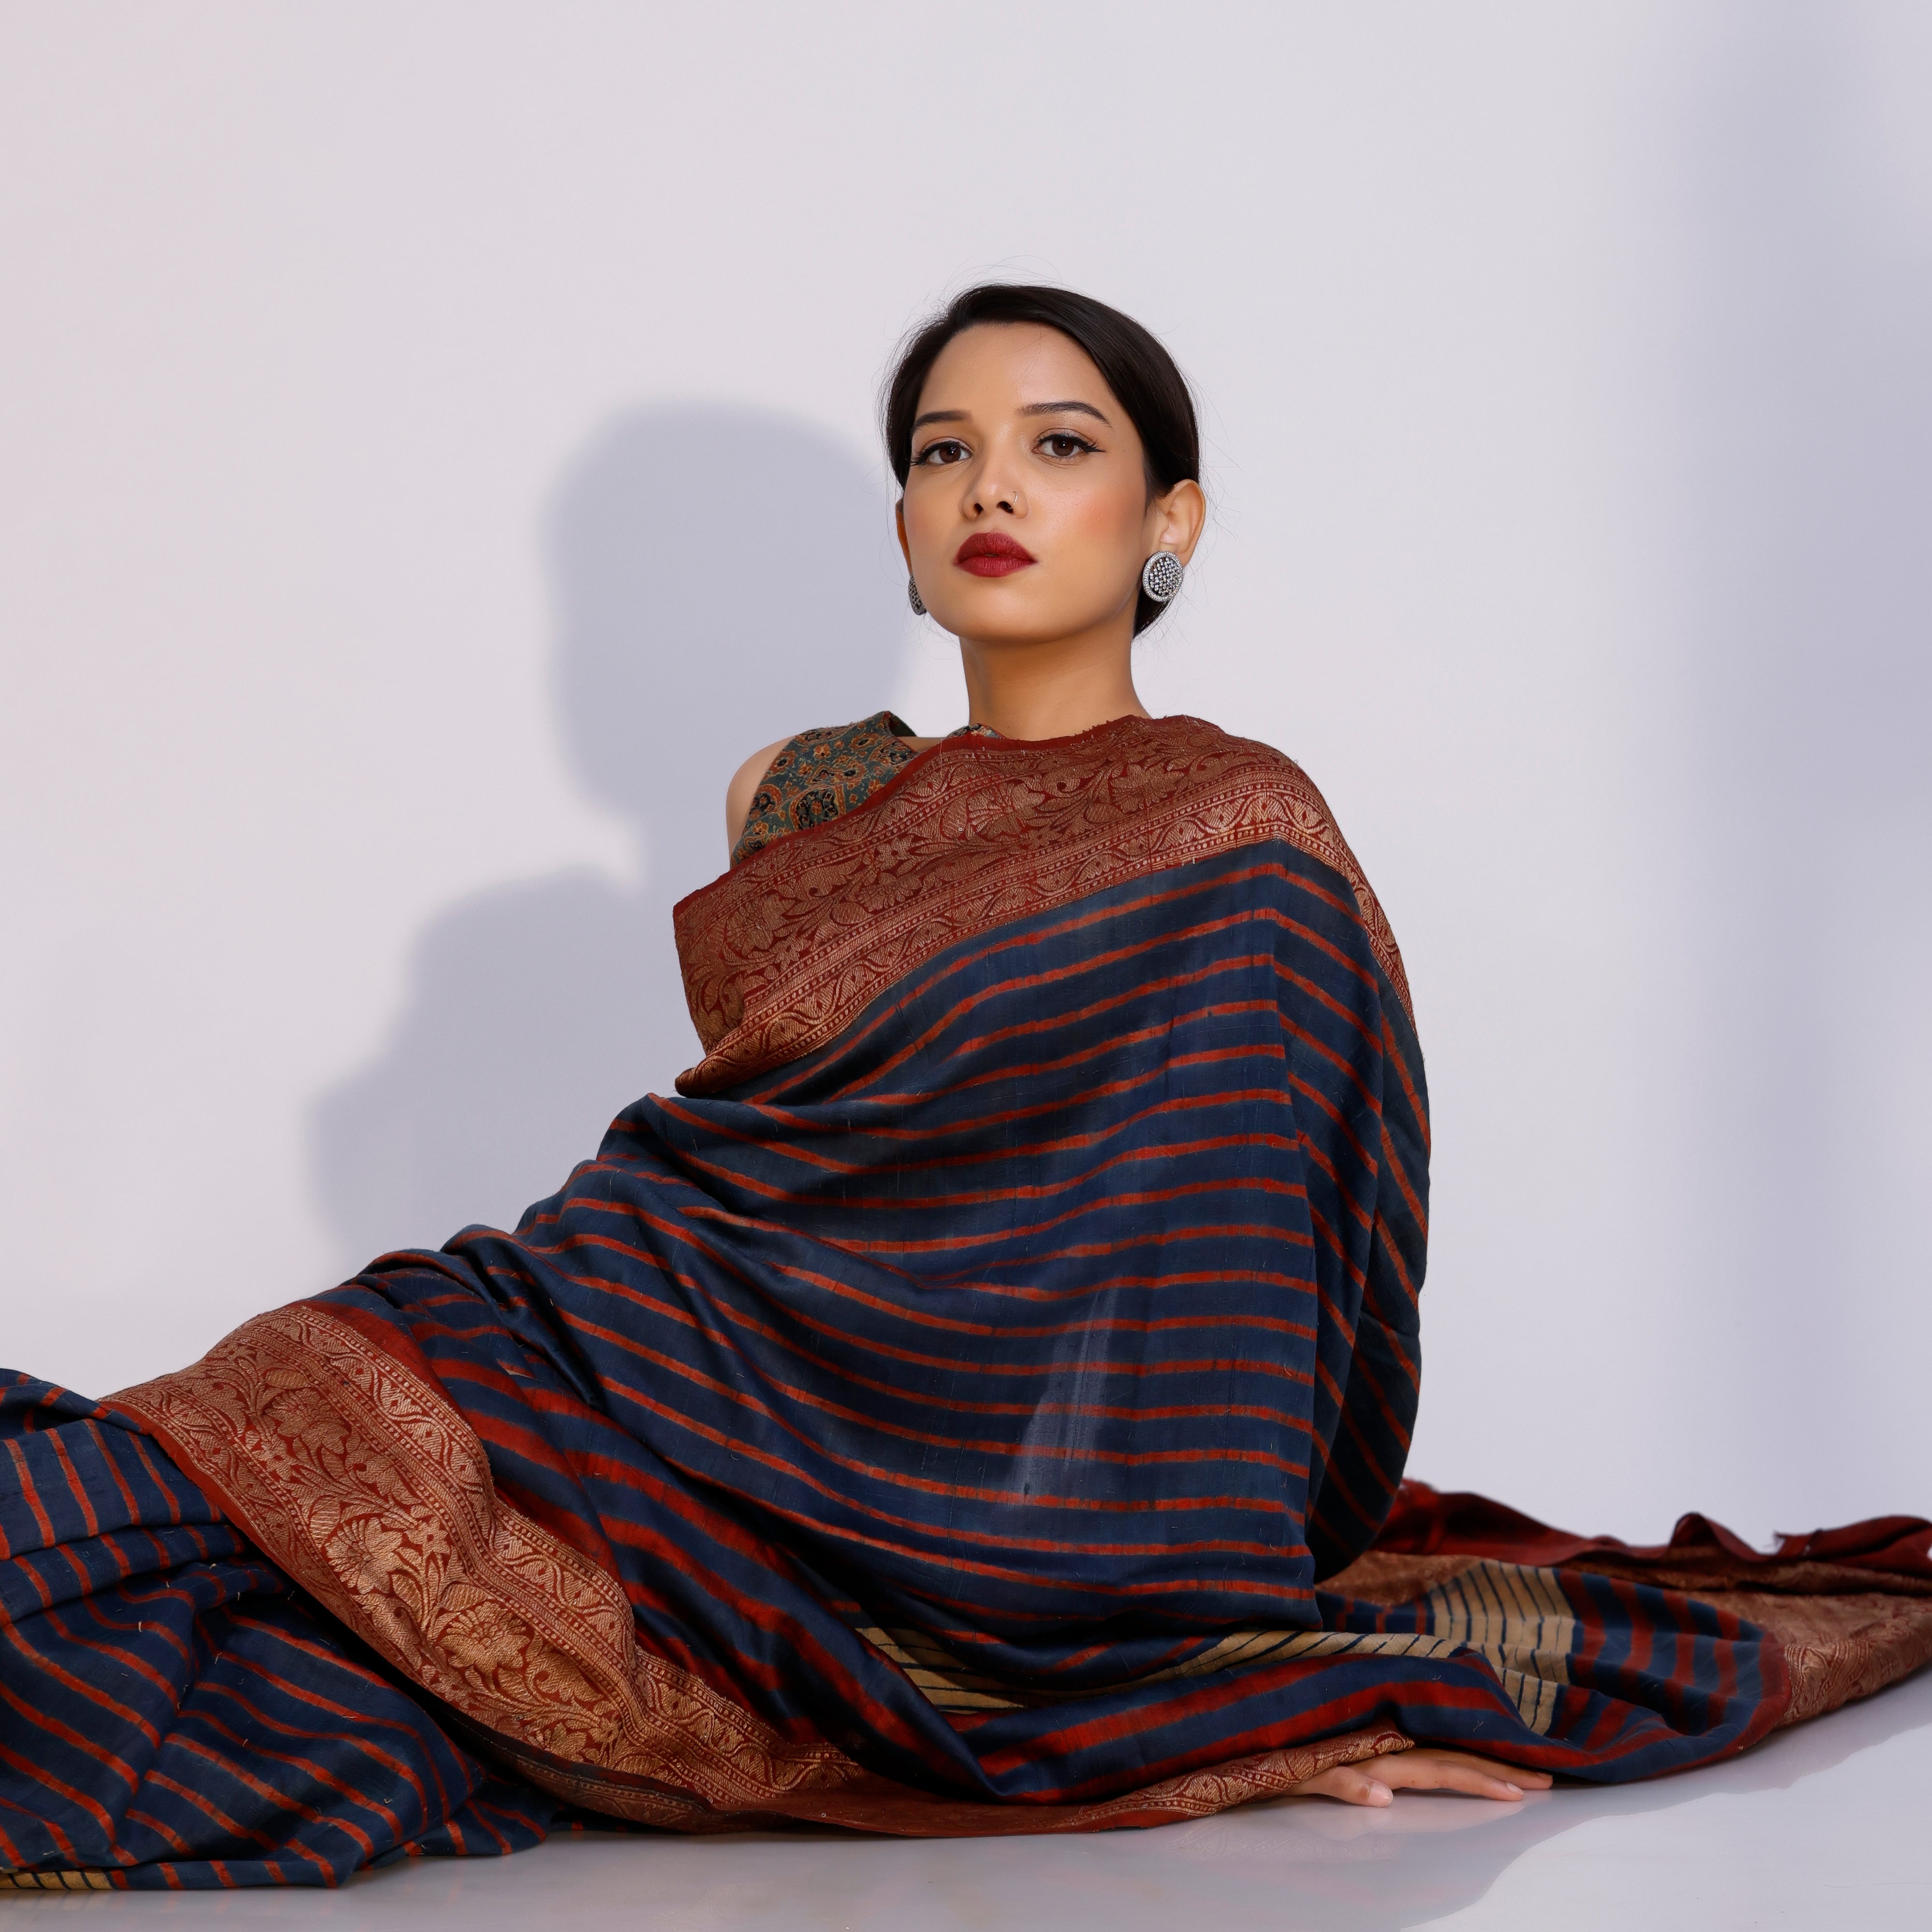 Comfort Everyday: Choosing the Perfect Saree for Daily Wear